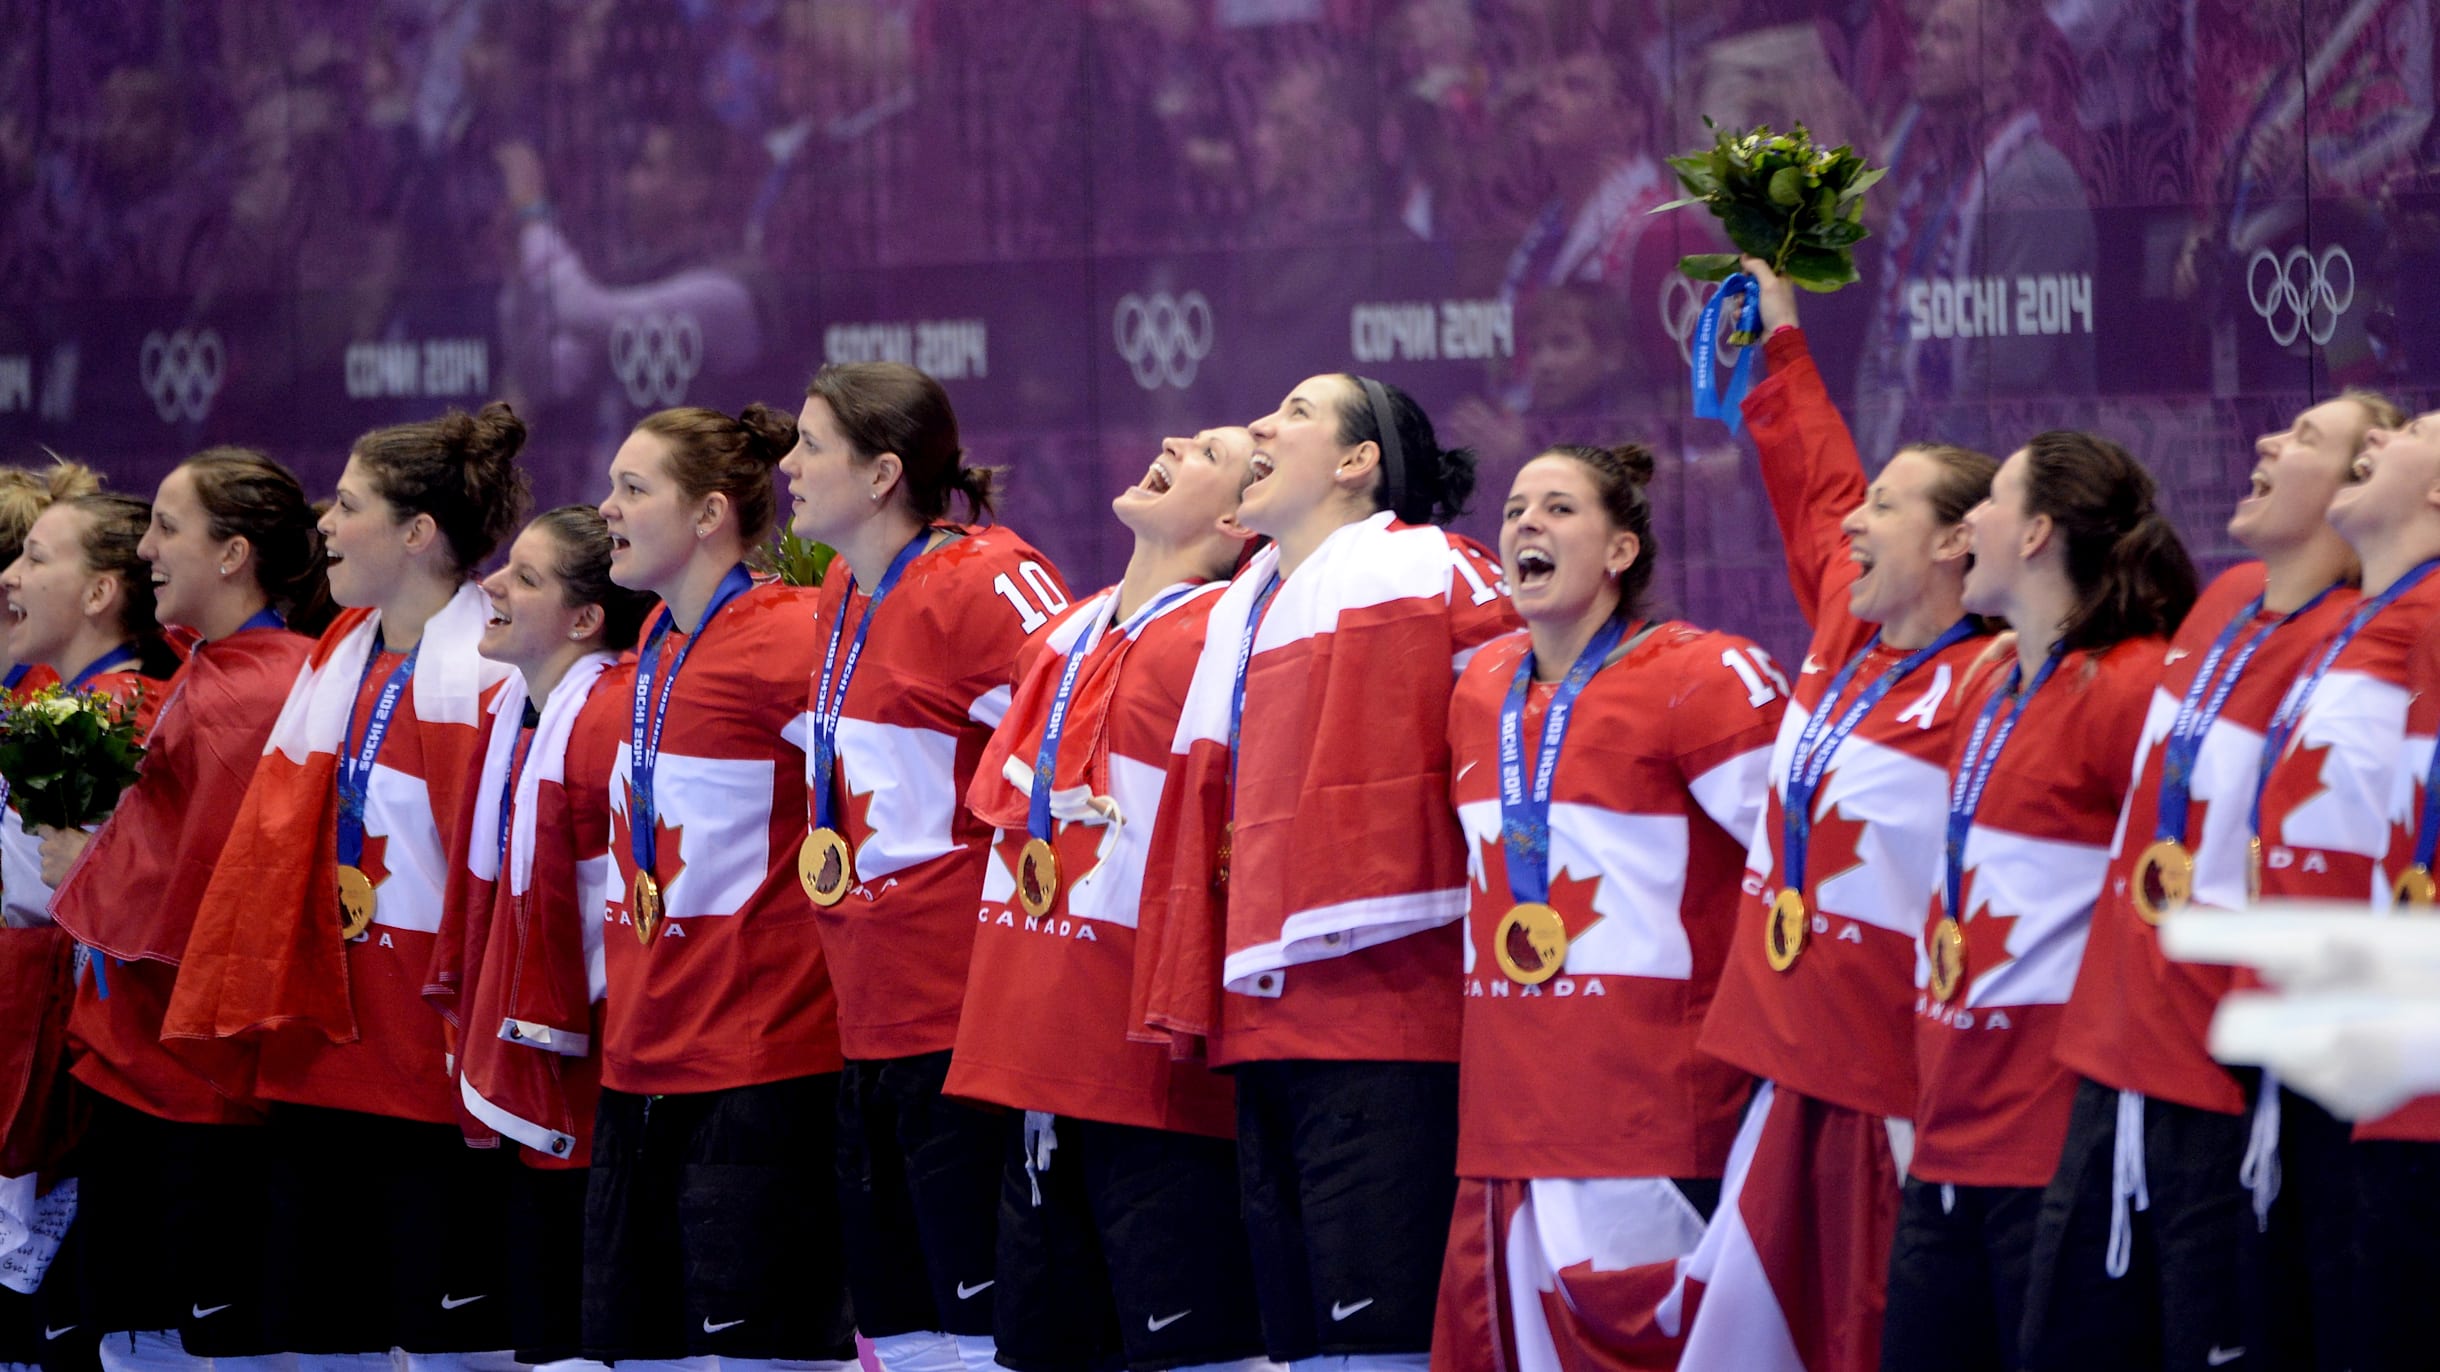 Hockey Canada unveils Olympic women's team looking to avenge gold-medal  loss